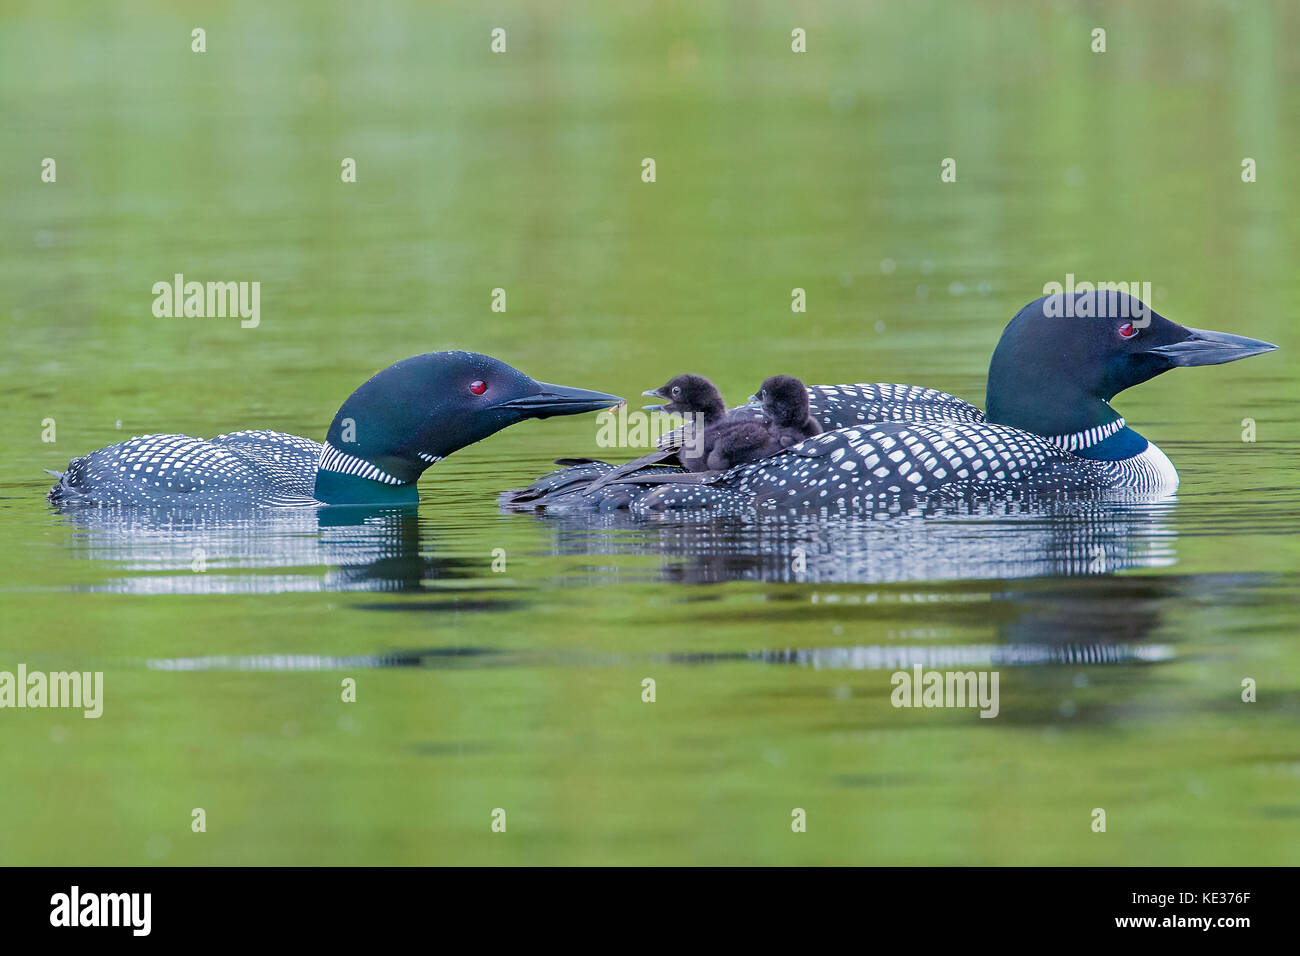 Adult common loons (Gavia immer) feeding two-week old chicks, central Alberta, Canada Stock Photo